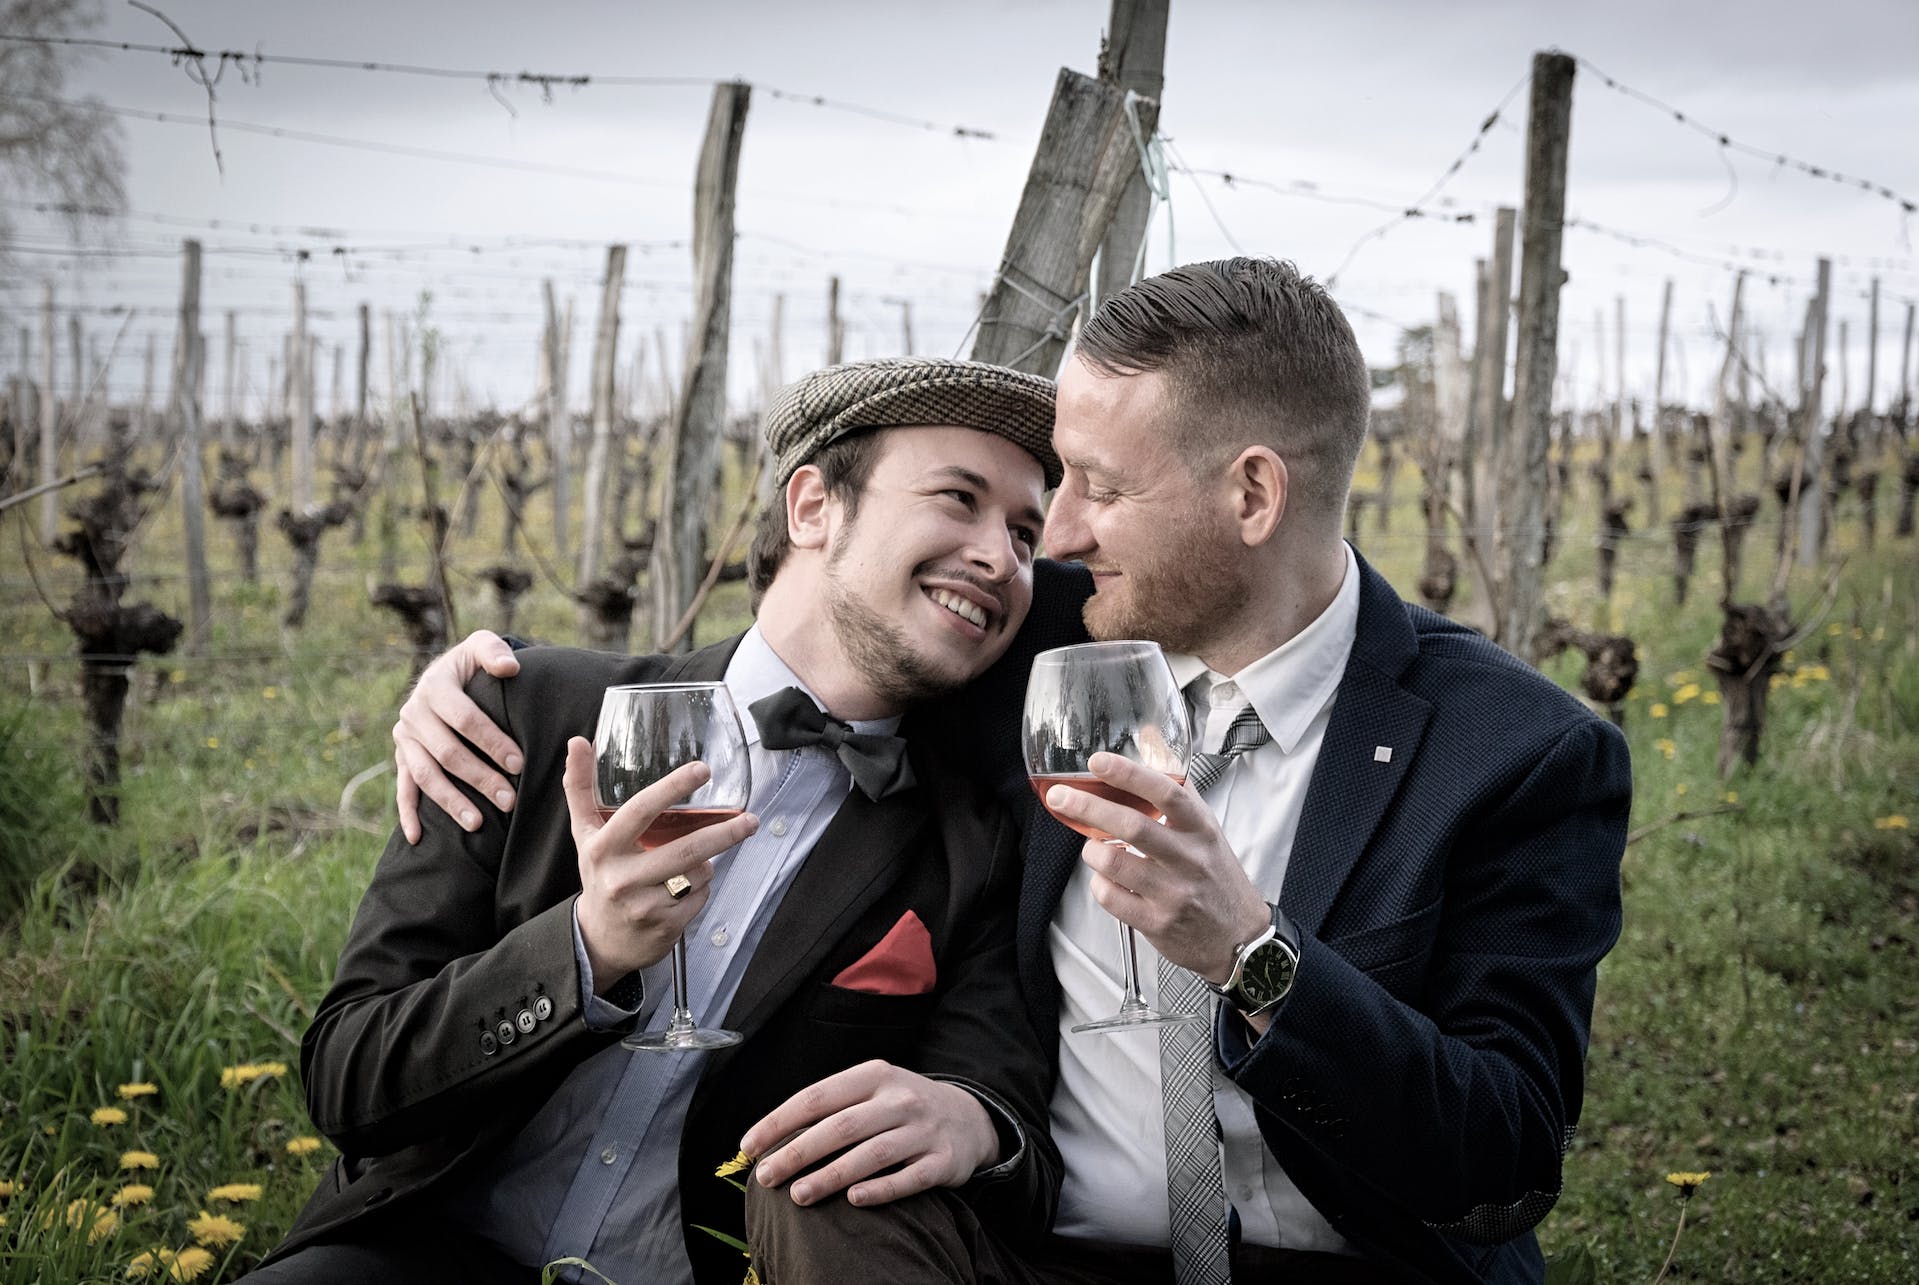 Two young men hug while drinking wine | Source: Pexels